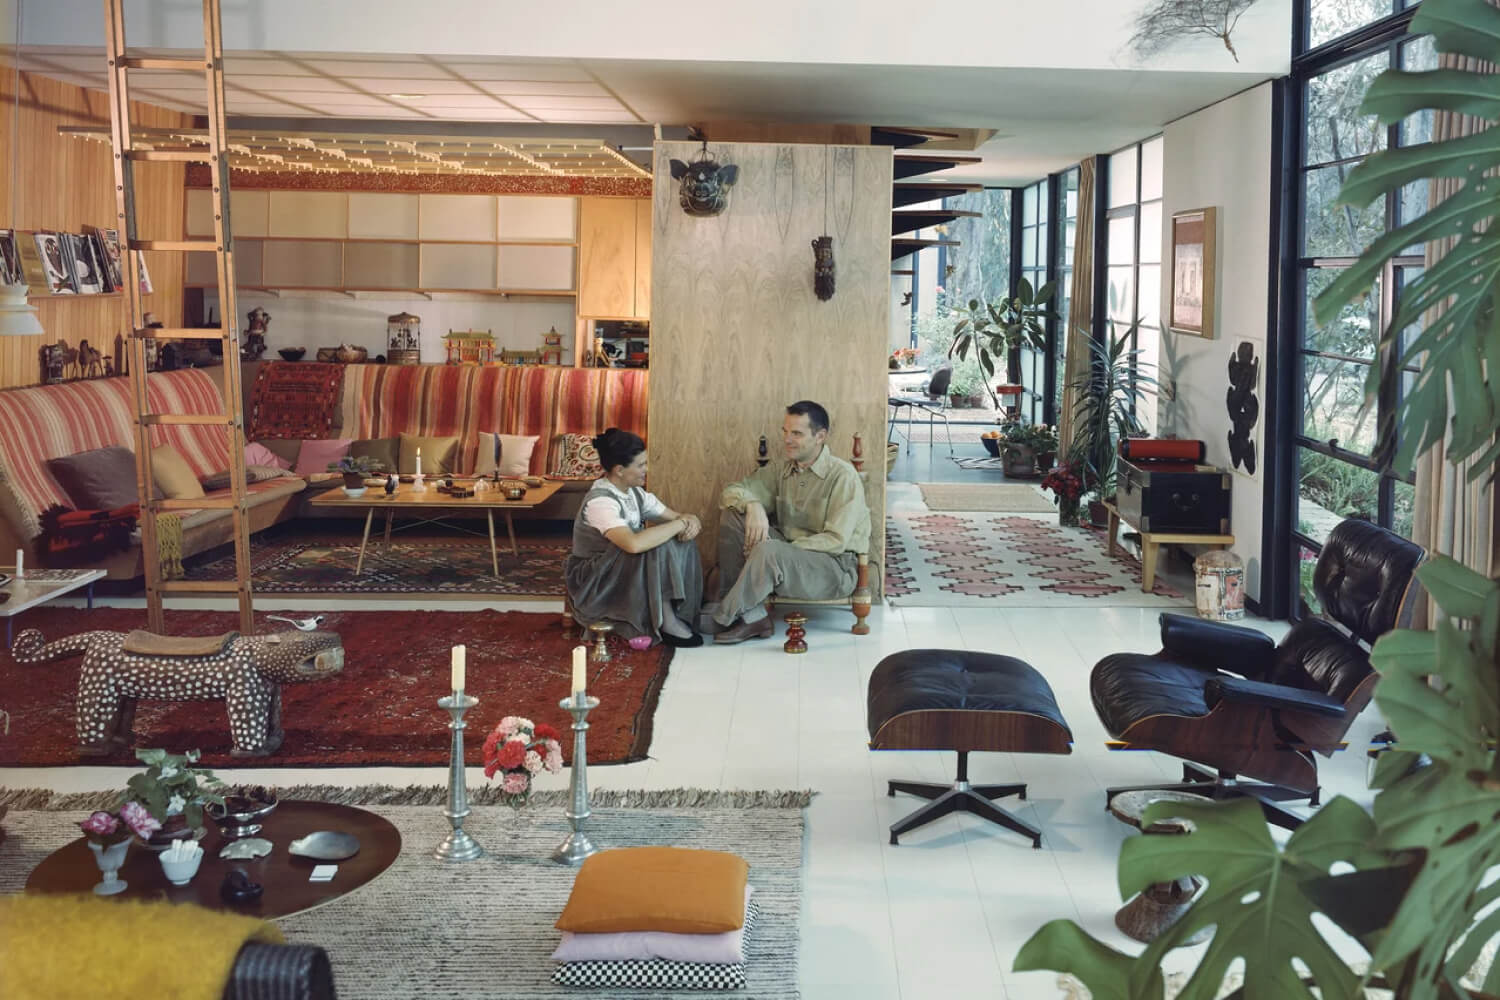 Charles Eames and his wife, Ray Eames, are sitting in their vividly mid-century modern home.